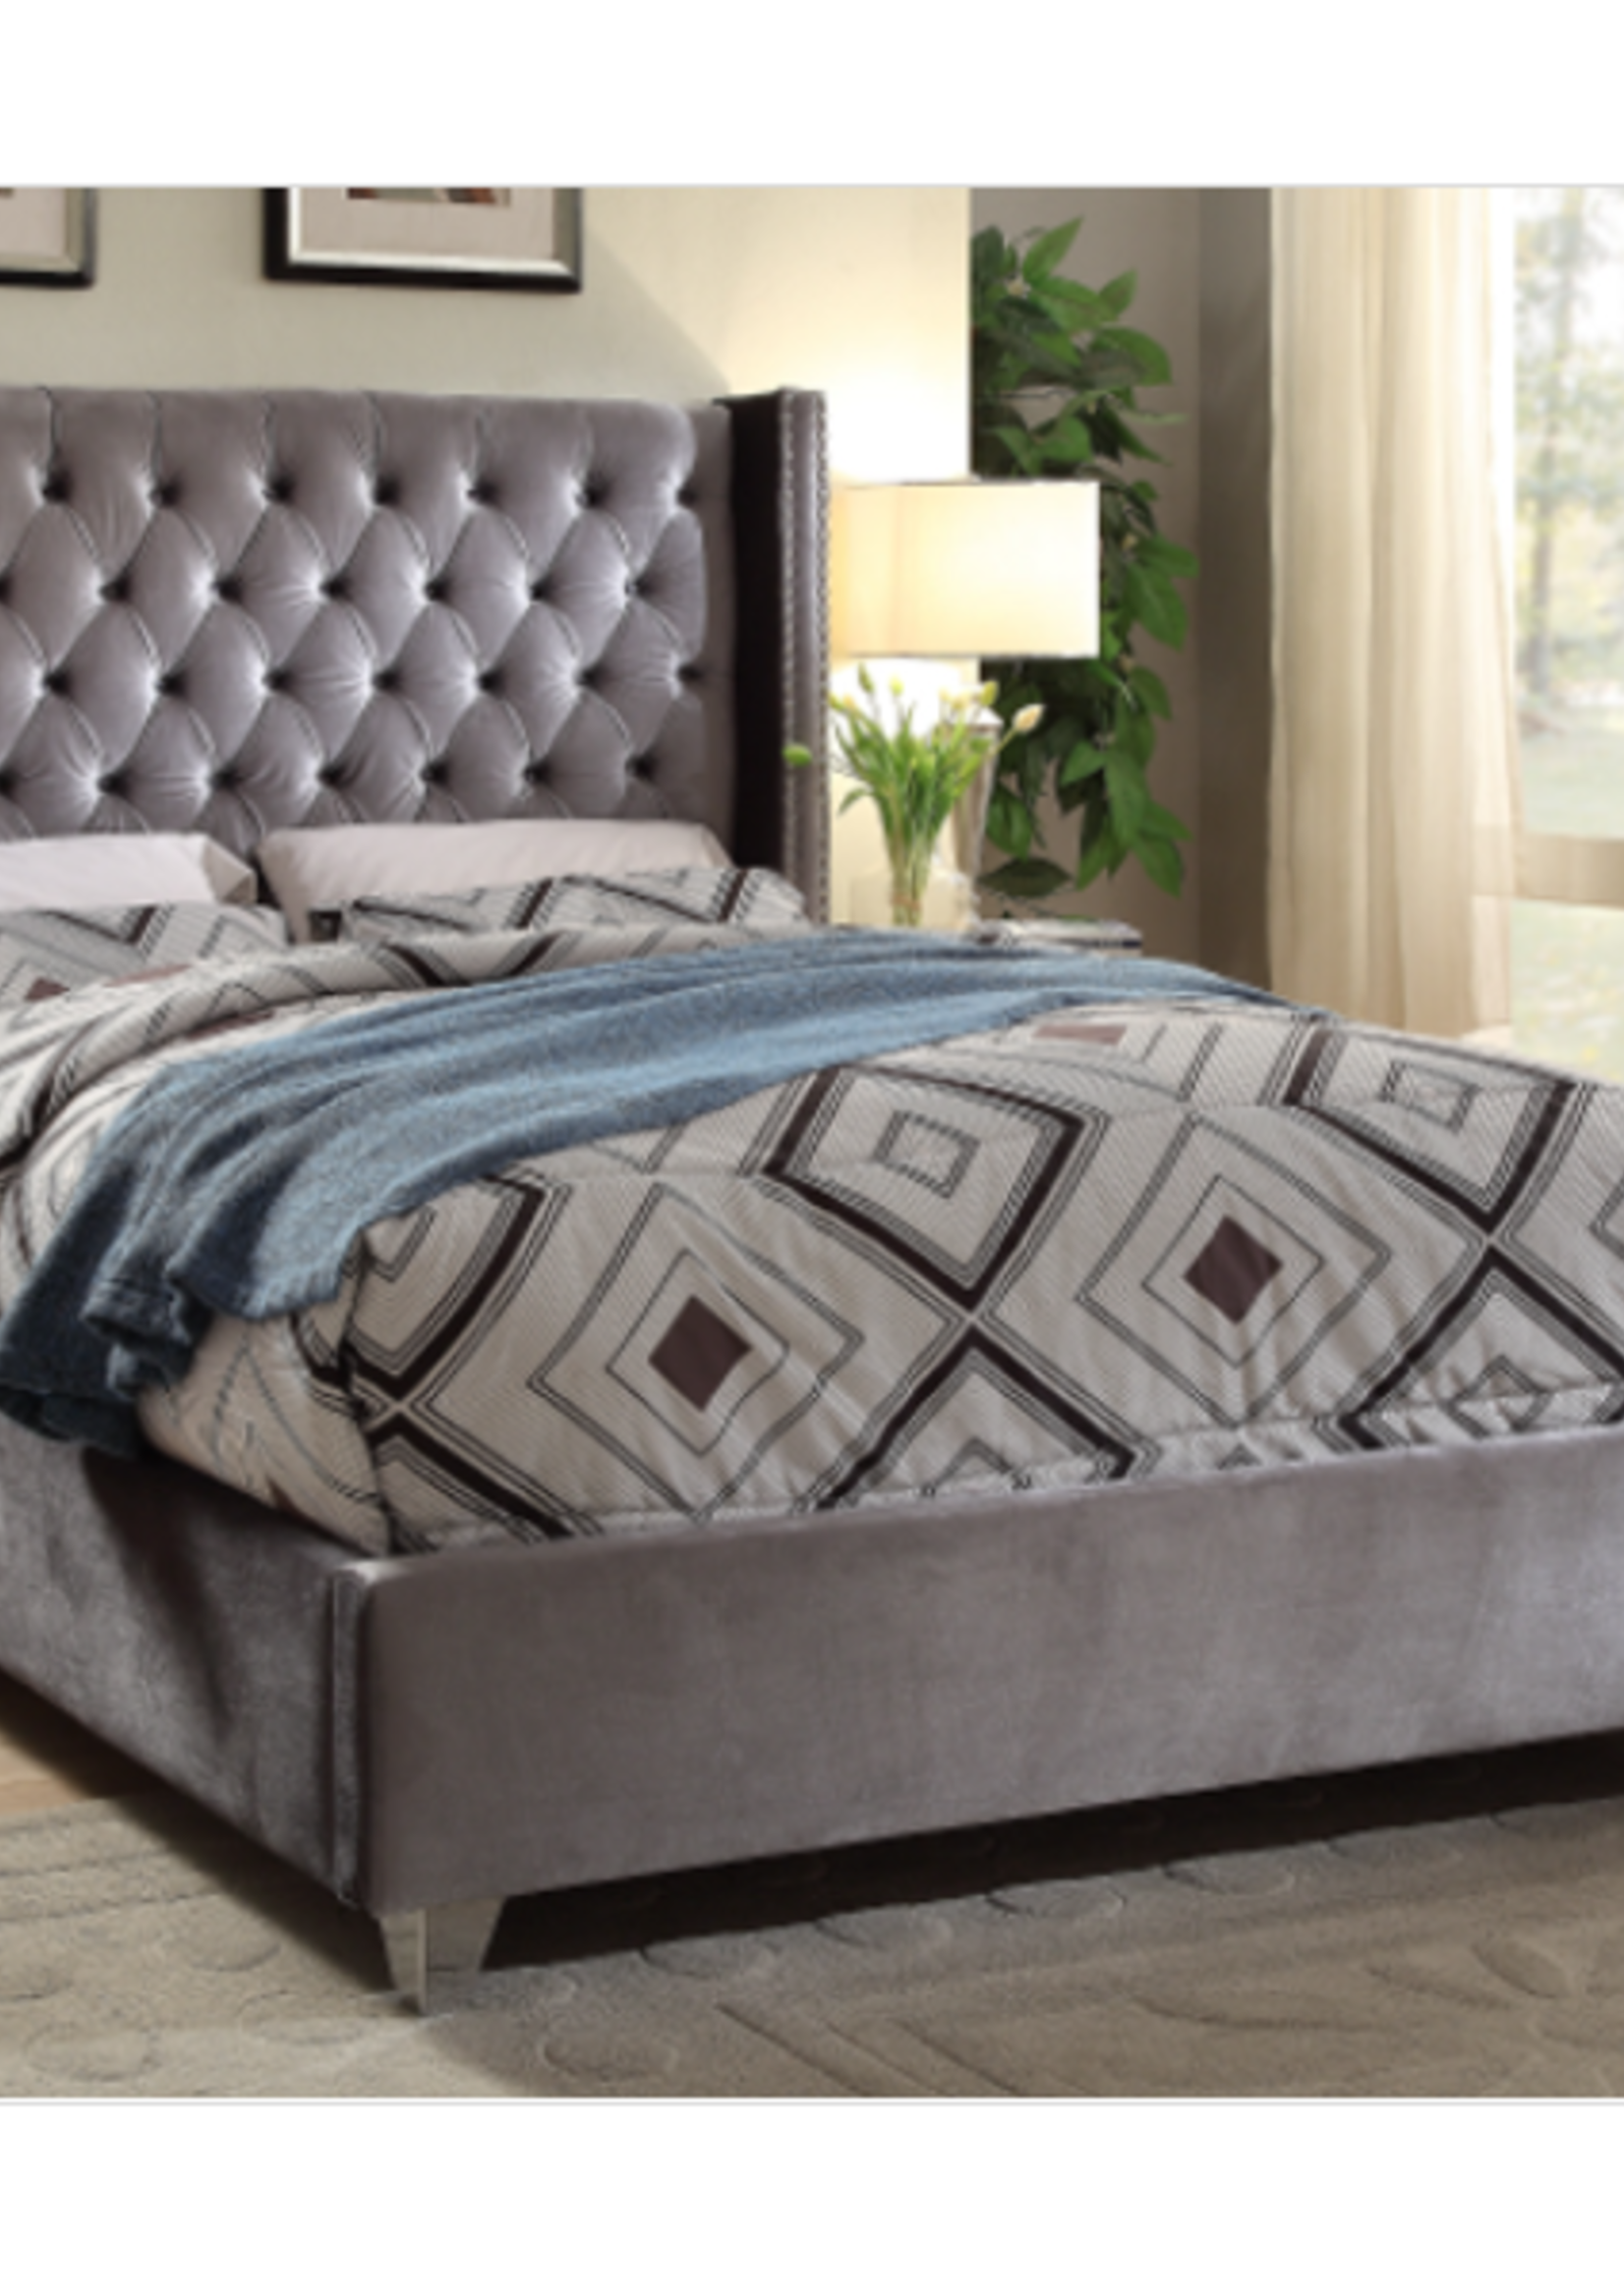 The Parksville Queen Light Grey Fabric Wing Bed Deep Button Tufting Nailhead Details